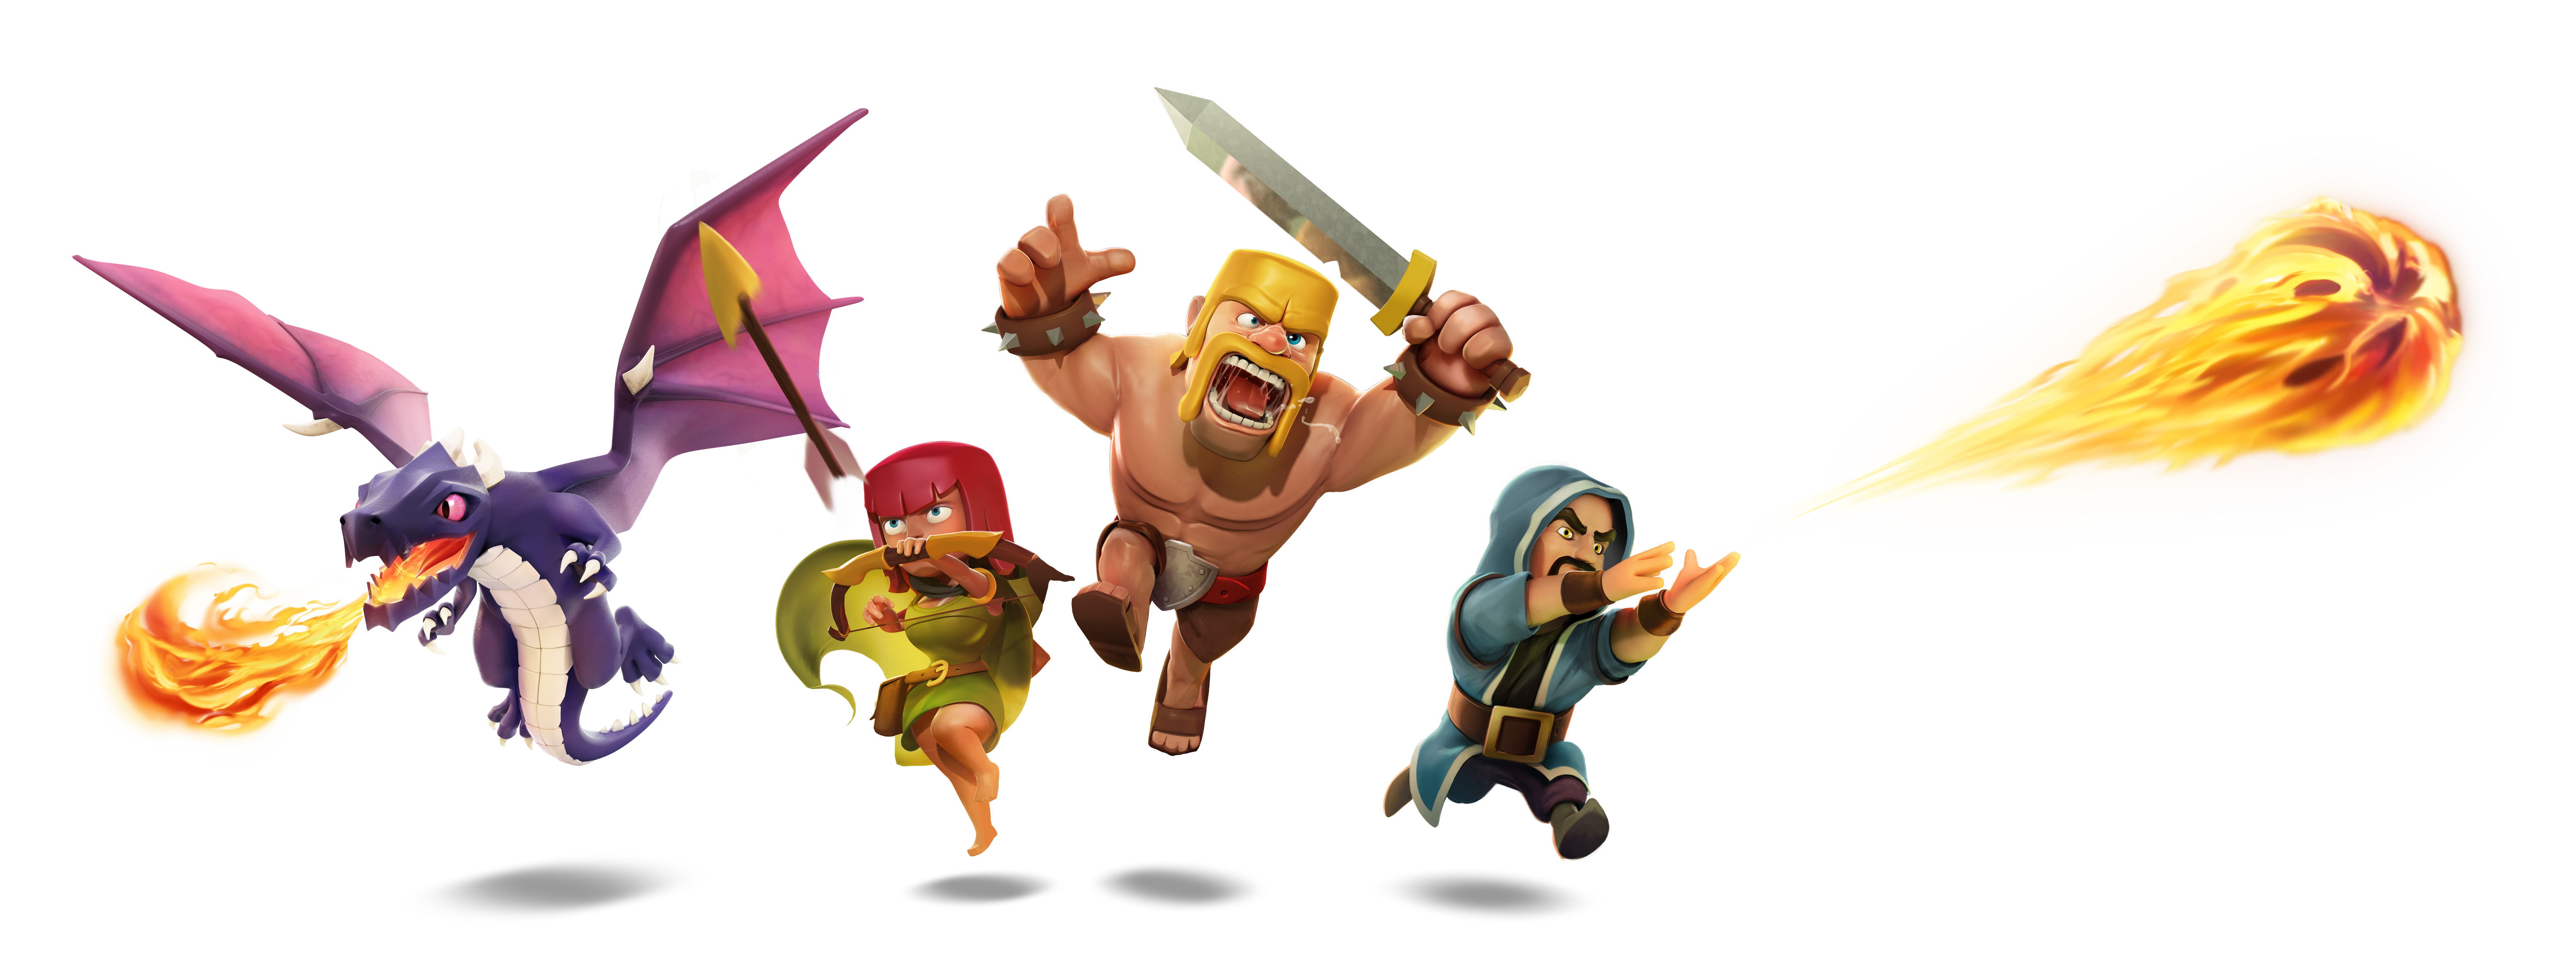 Clash Of Clans Video Game Characters Transparent Background Dragon Barbarian Archer Fireballs Wizard 6224x2344